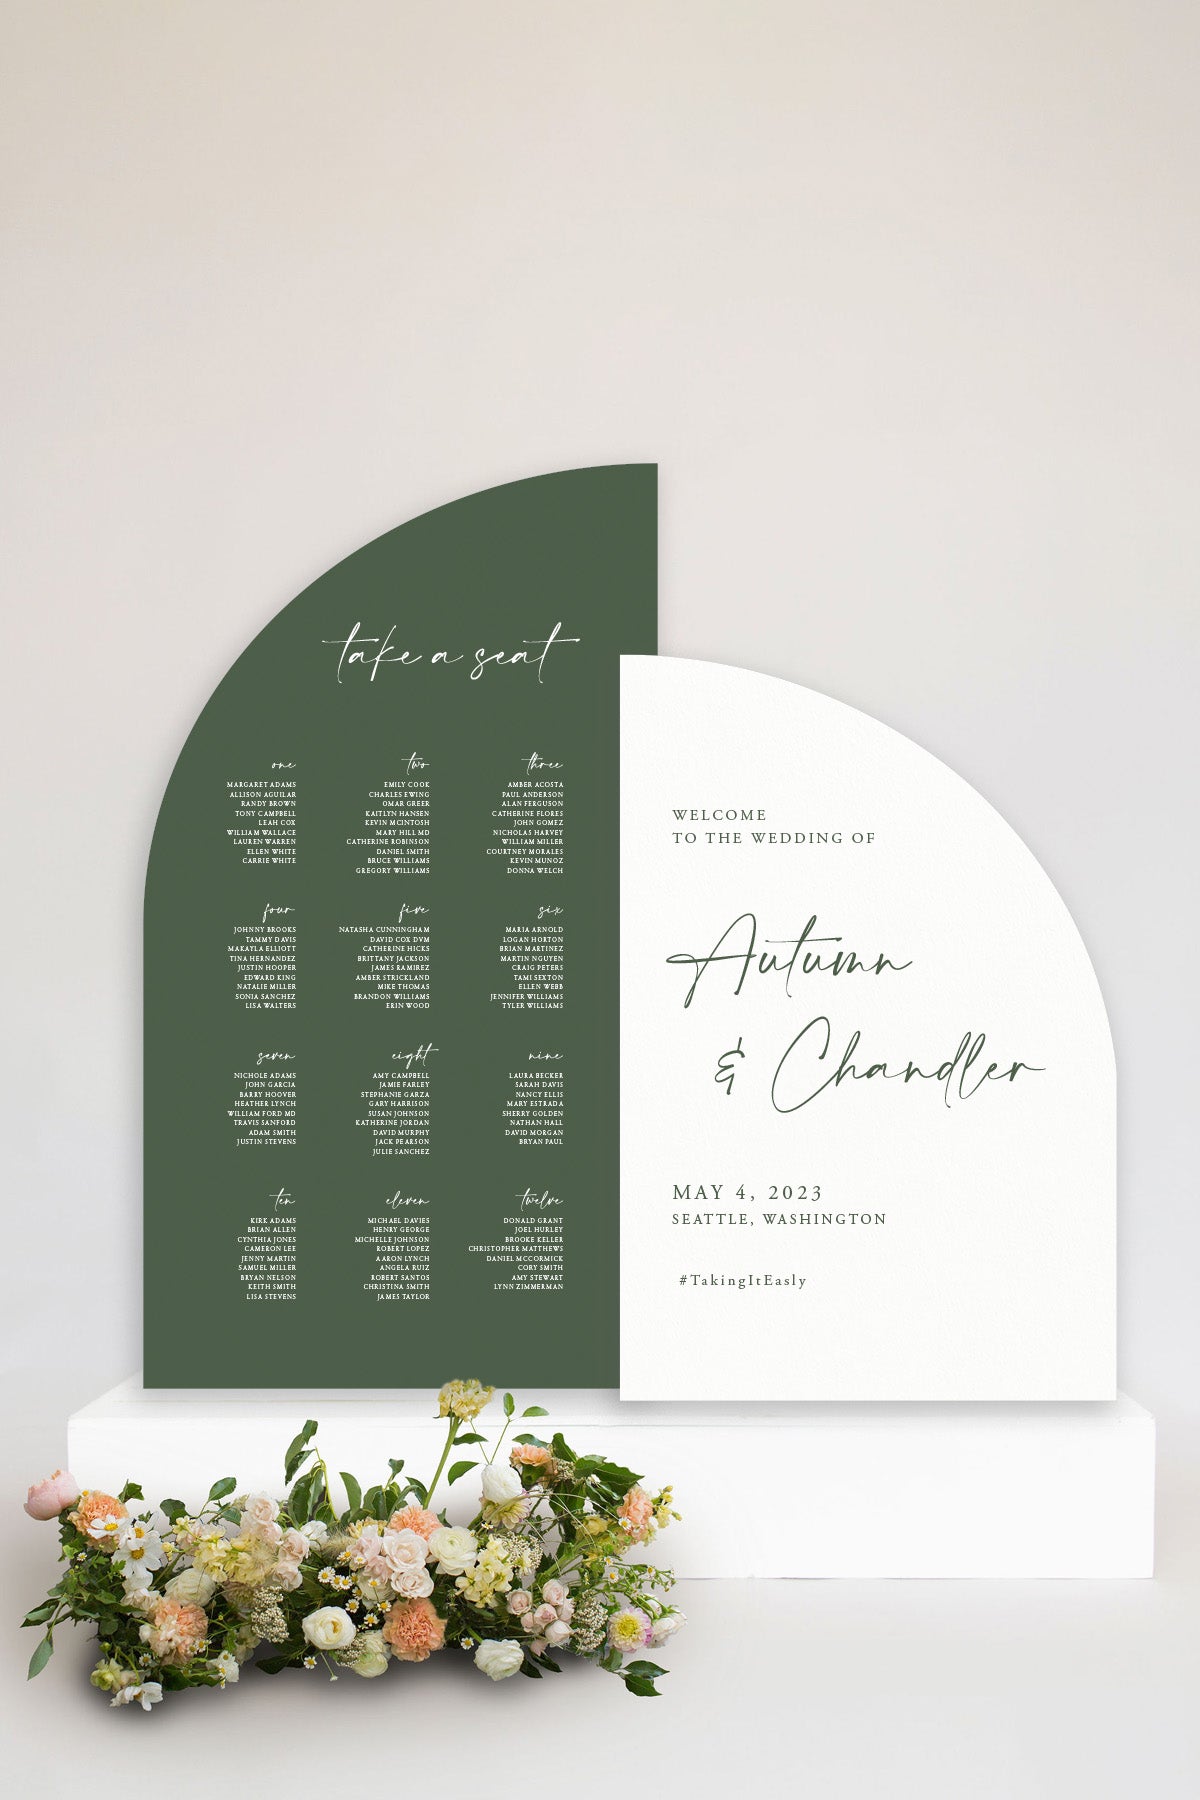 Half Arch Wedding Sign Lily Roe Co.